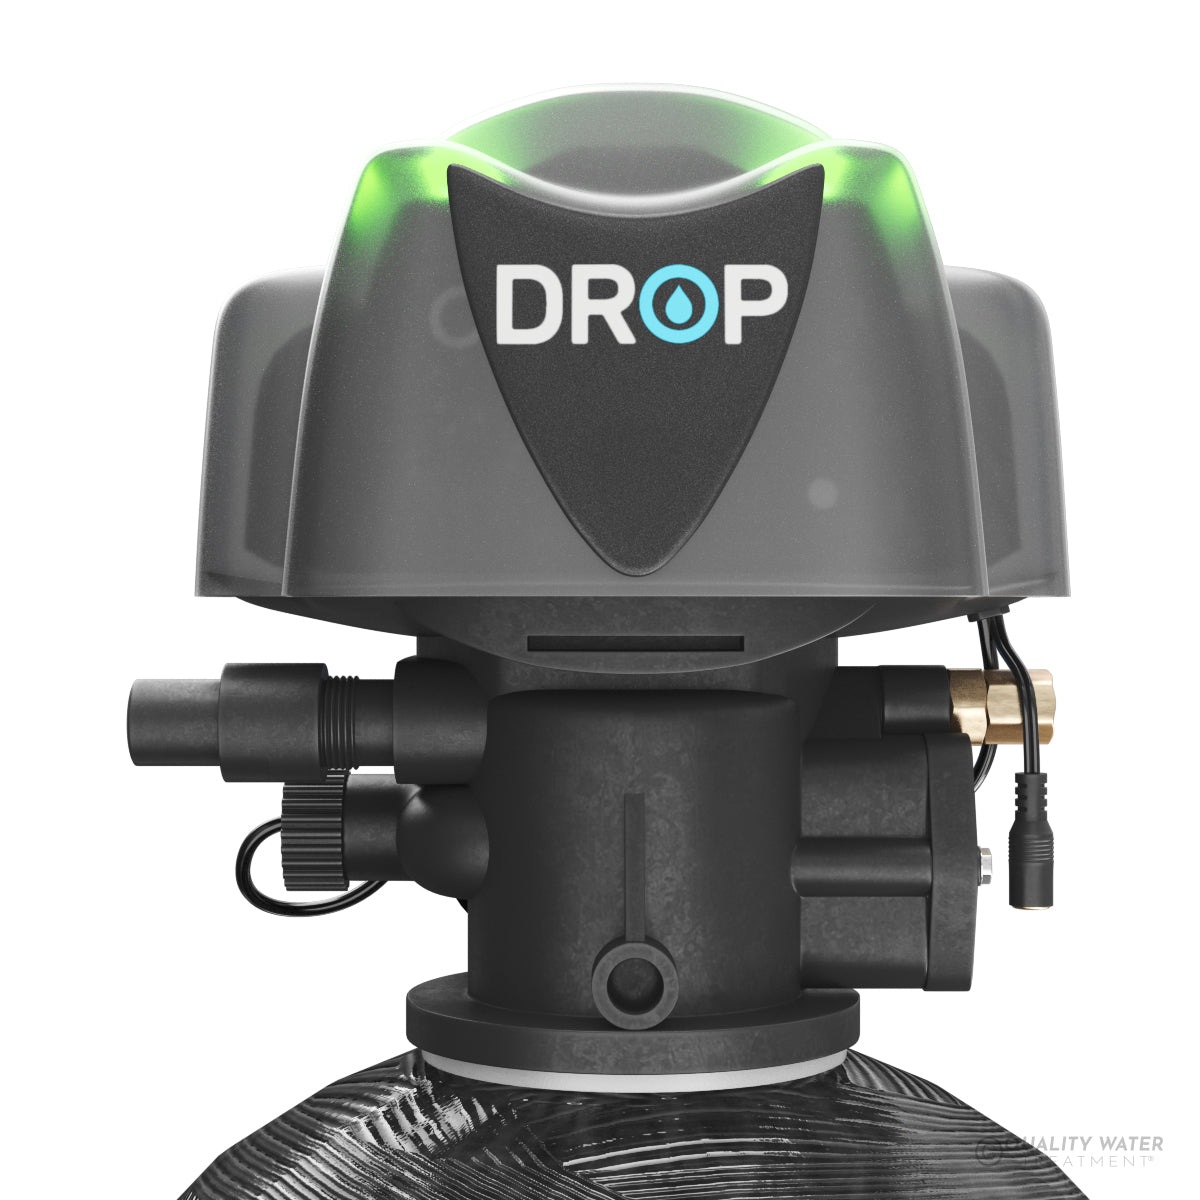 DROP Pro Smart Home Softener System - Quality Water Treatment